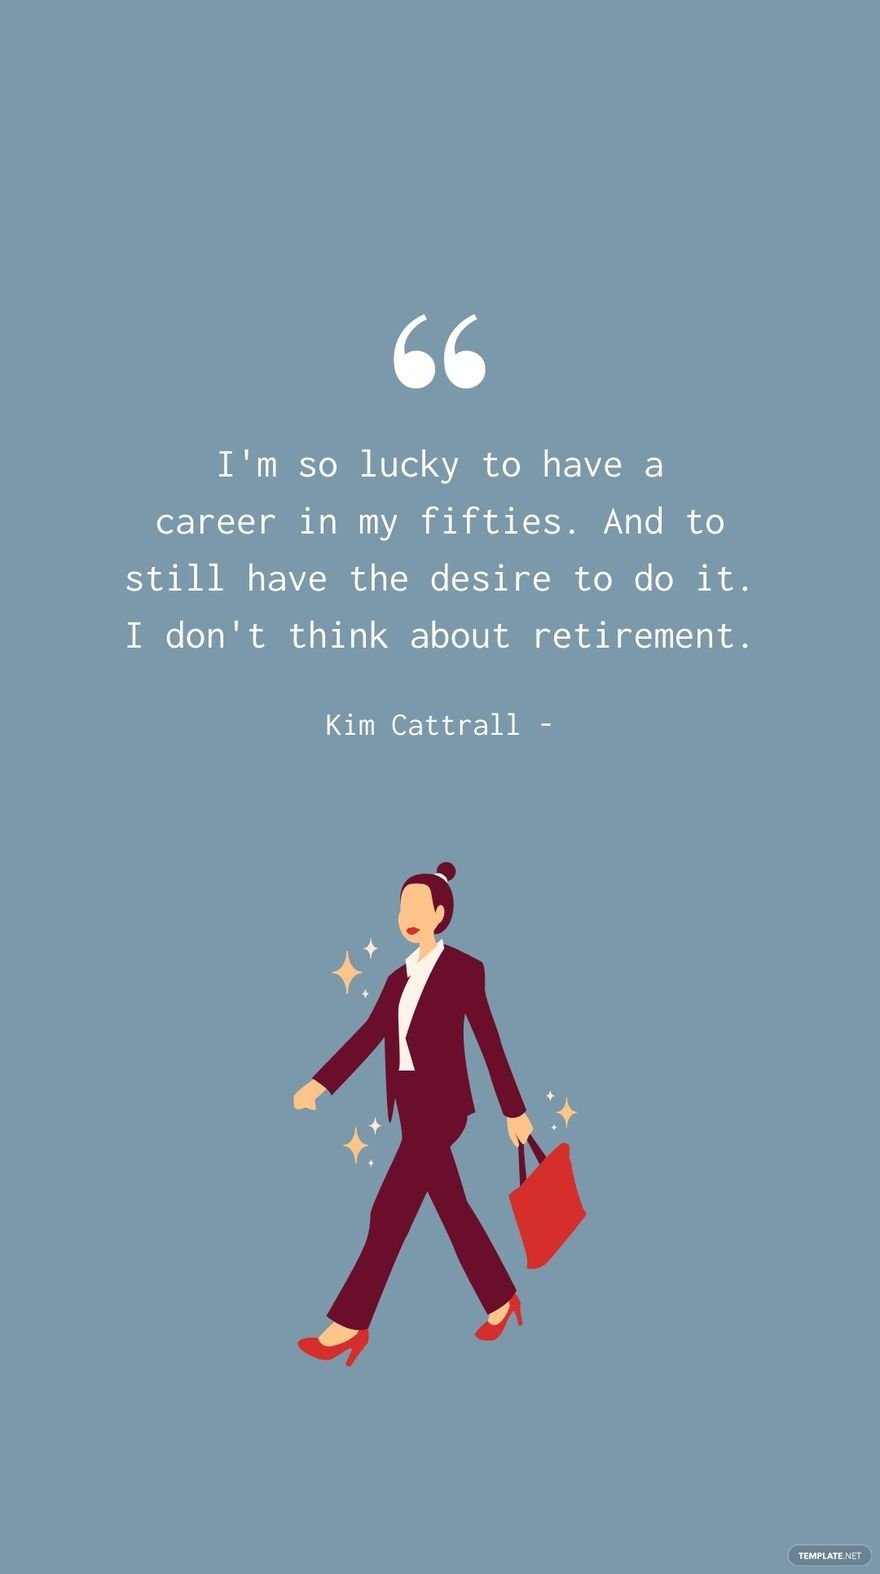 Kim Cattrall - I'm so lucky to have a career in my fifties. And to still have the desire to do it. I don't think about retirement.